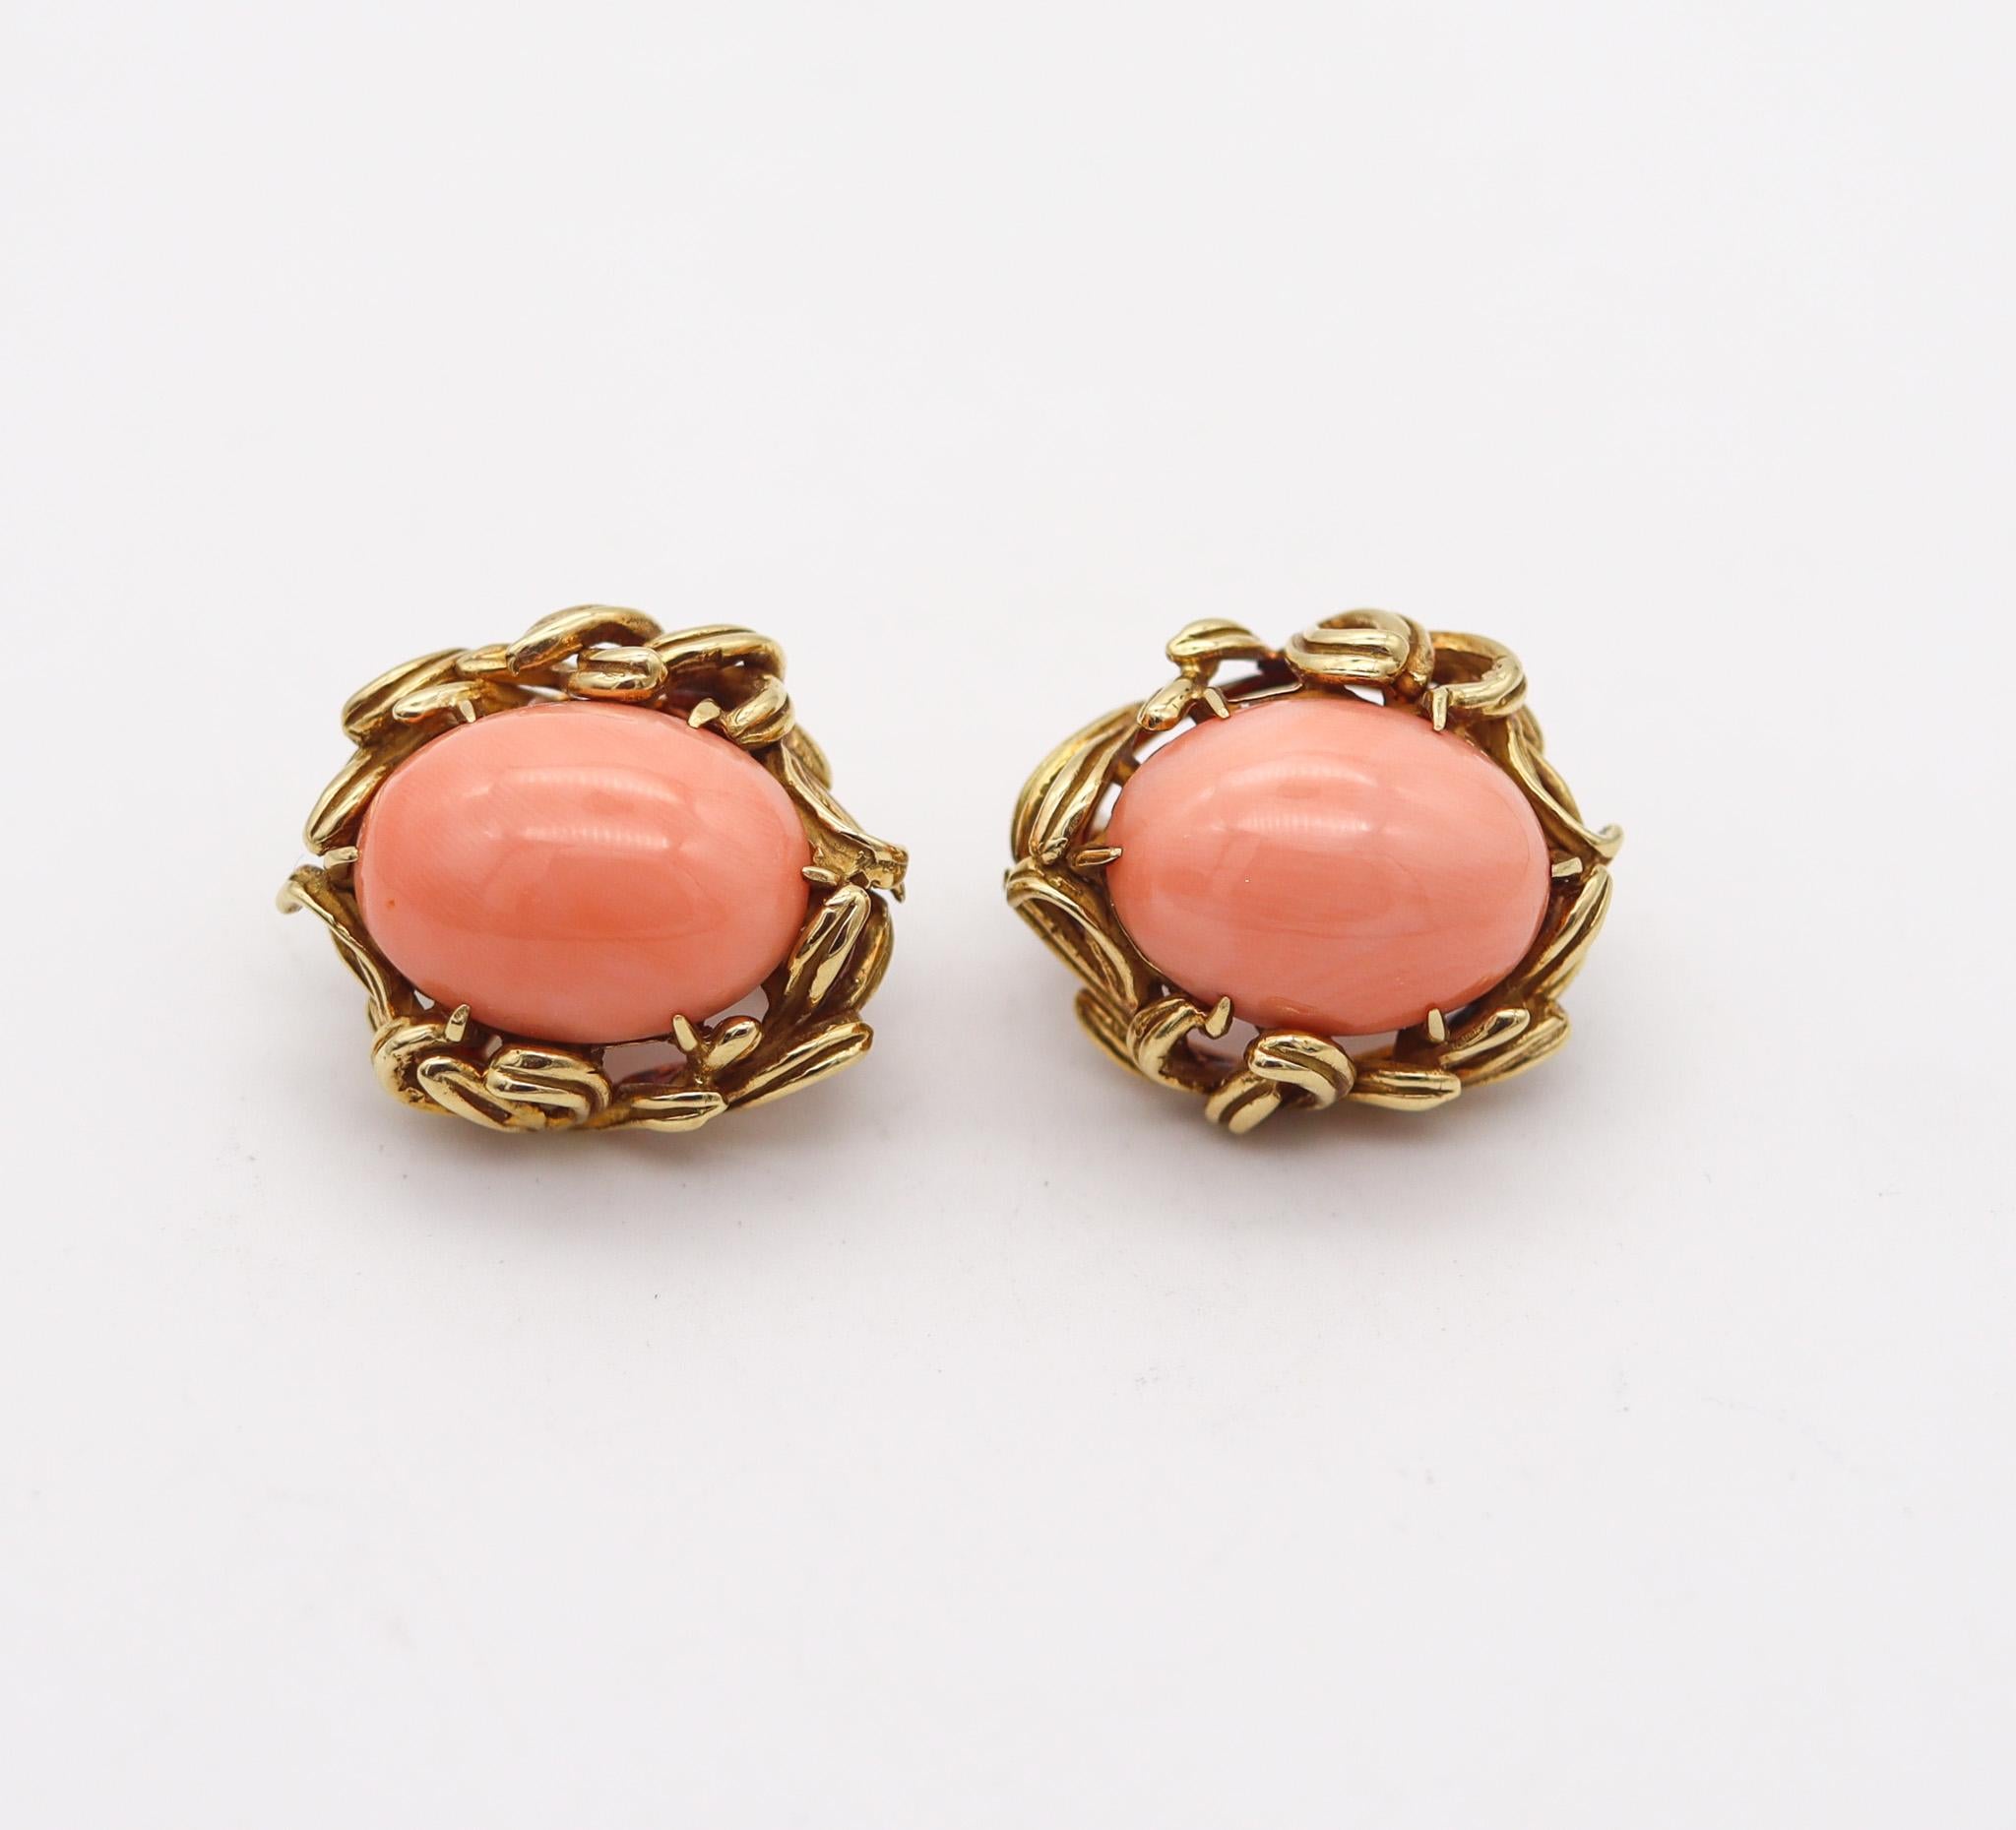 Italian mid-century earrings with salmon corals.

Beautiful pair of modernist earrings, created in Italy during the mid century period back in the 1960. These earrings has been crafted with a substantial bold look in solid yellow gold of 18 karats